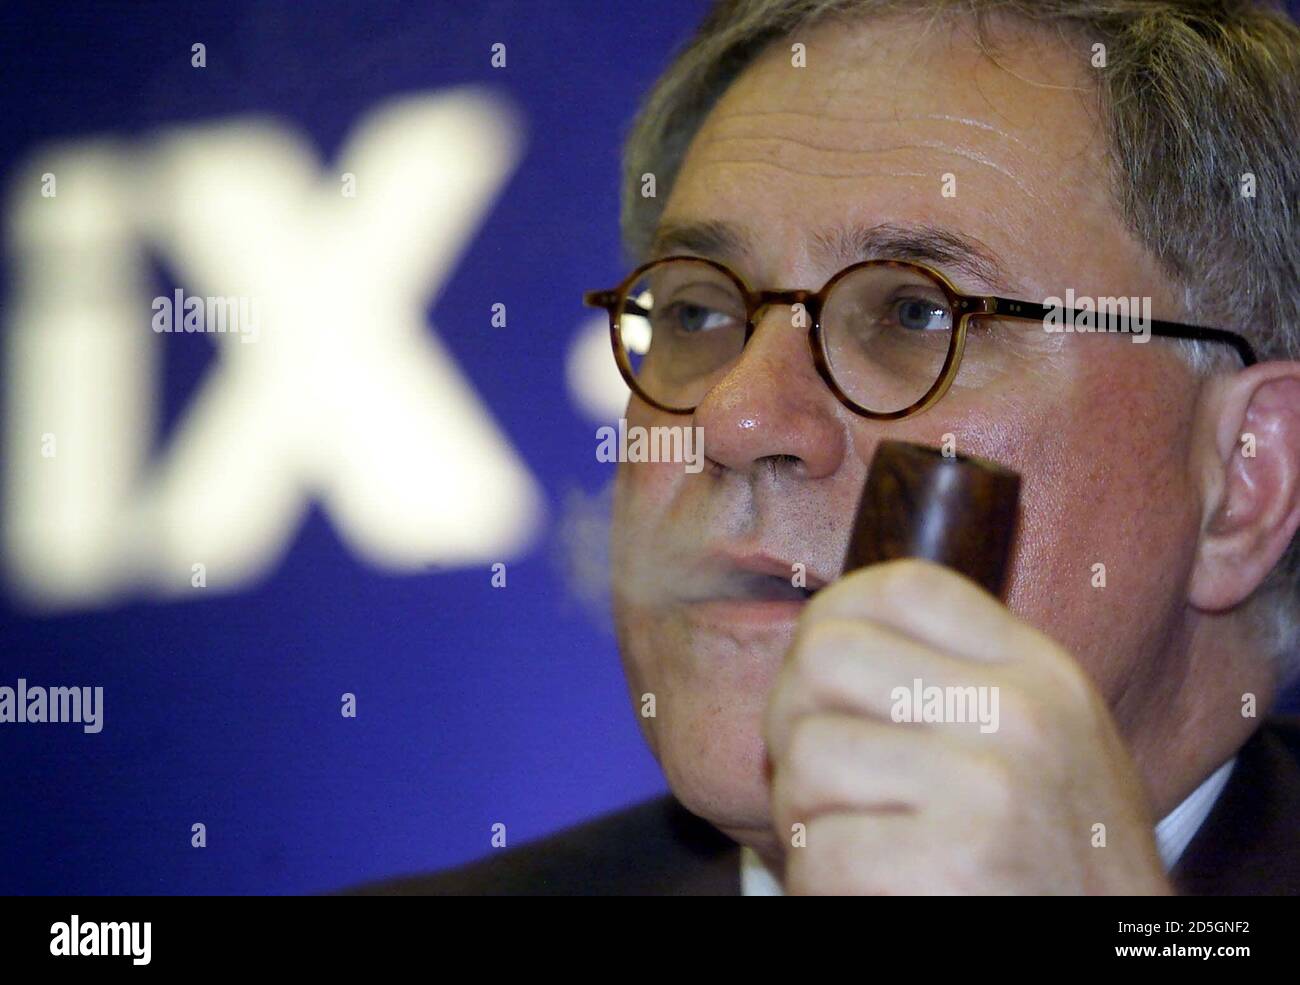 Werner Seifert, chairman of Deutsche Boerse AG and designated CEO of "iX  international exchange", smokes a pipe when he listens to reporter's  questions during a news conference in Frankfurt, July 17. Deutsche